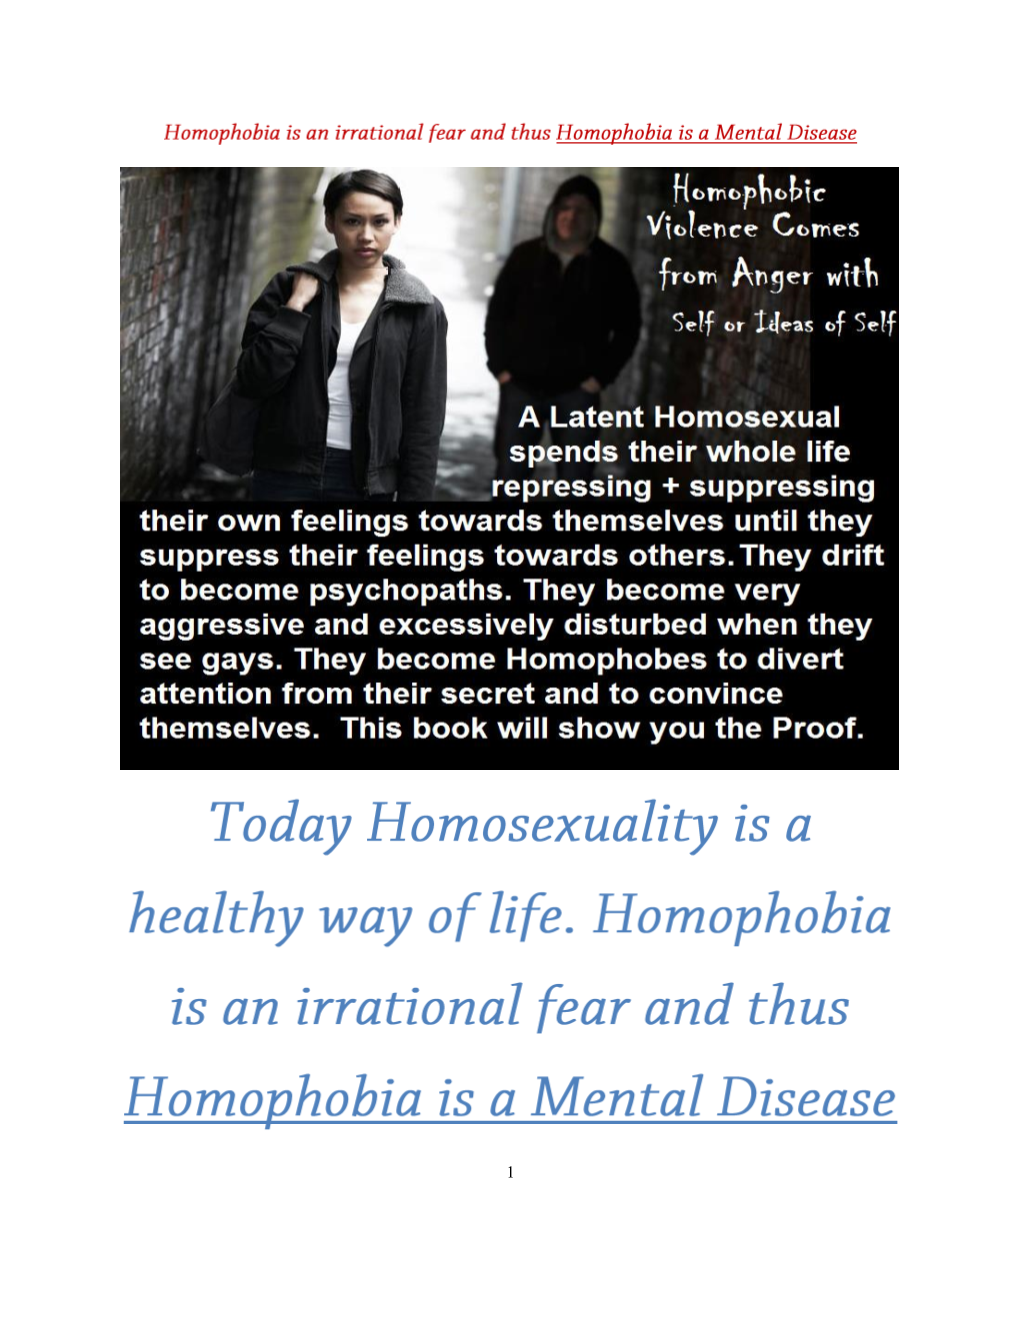 Excess Homophobia Is Caused by Latent Secret Homosexuality